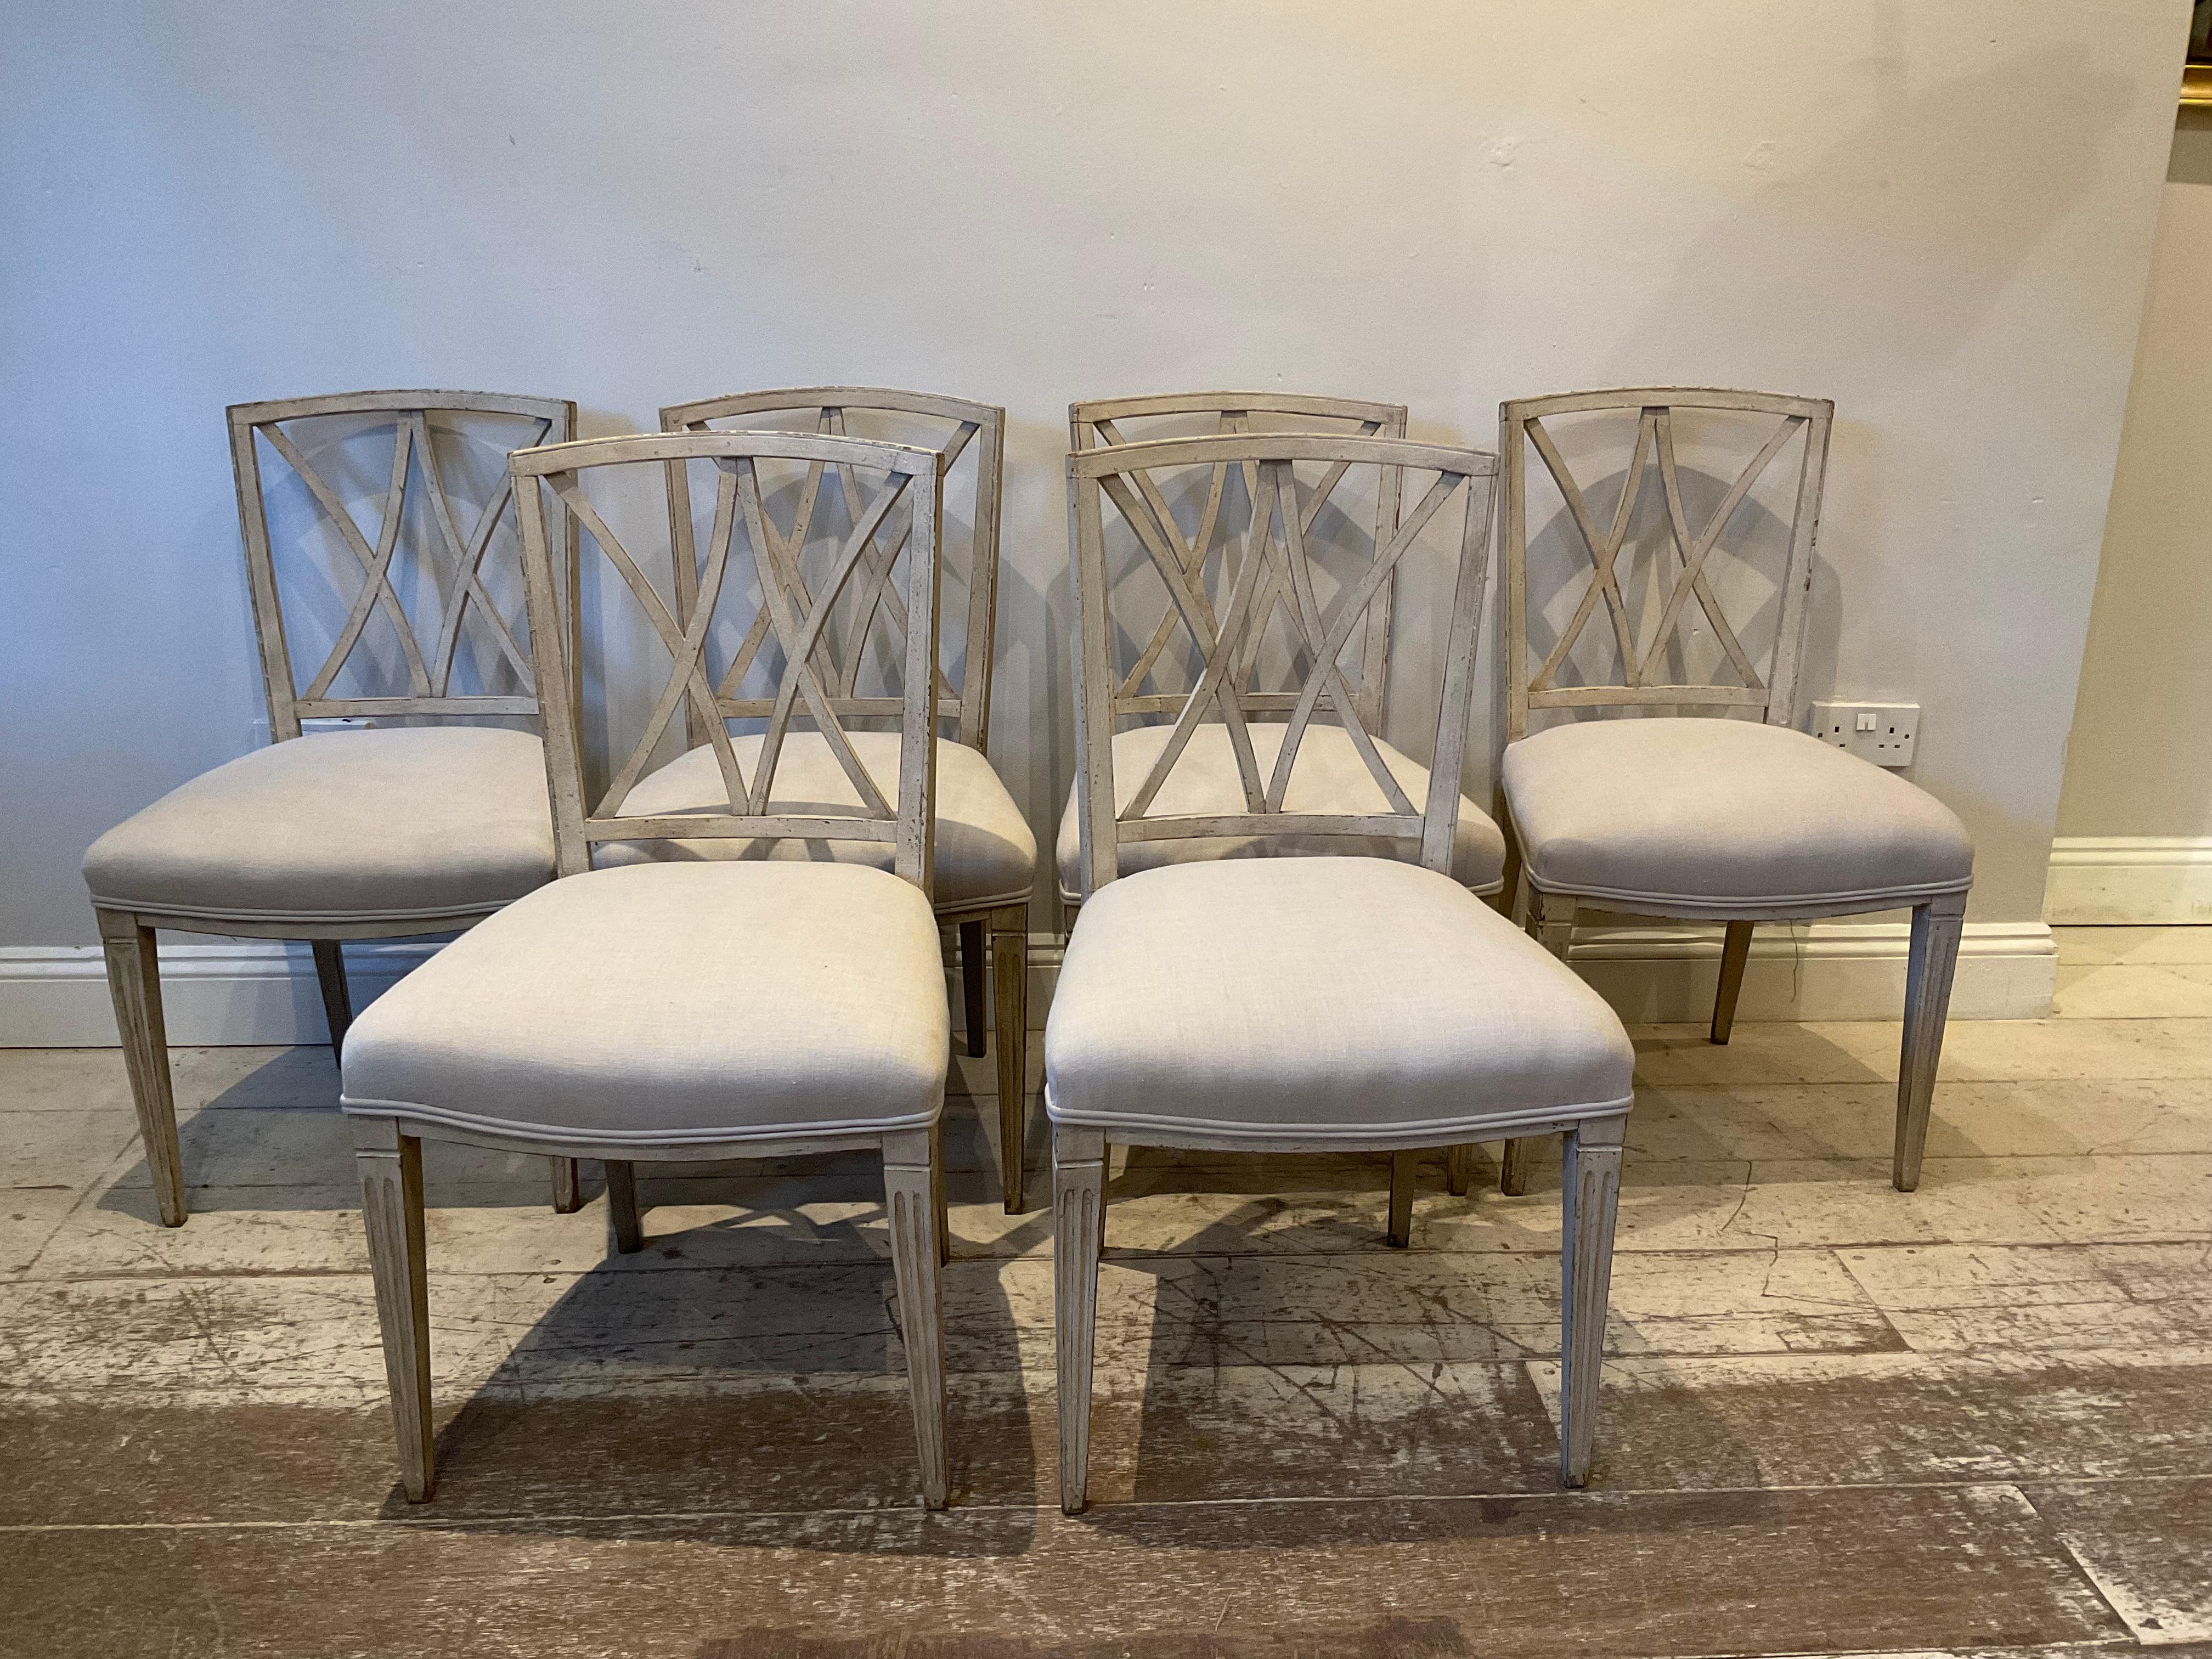 Country Set of 6, 1940s Stylish Italian Painted Lattice Backed Dining Chairs